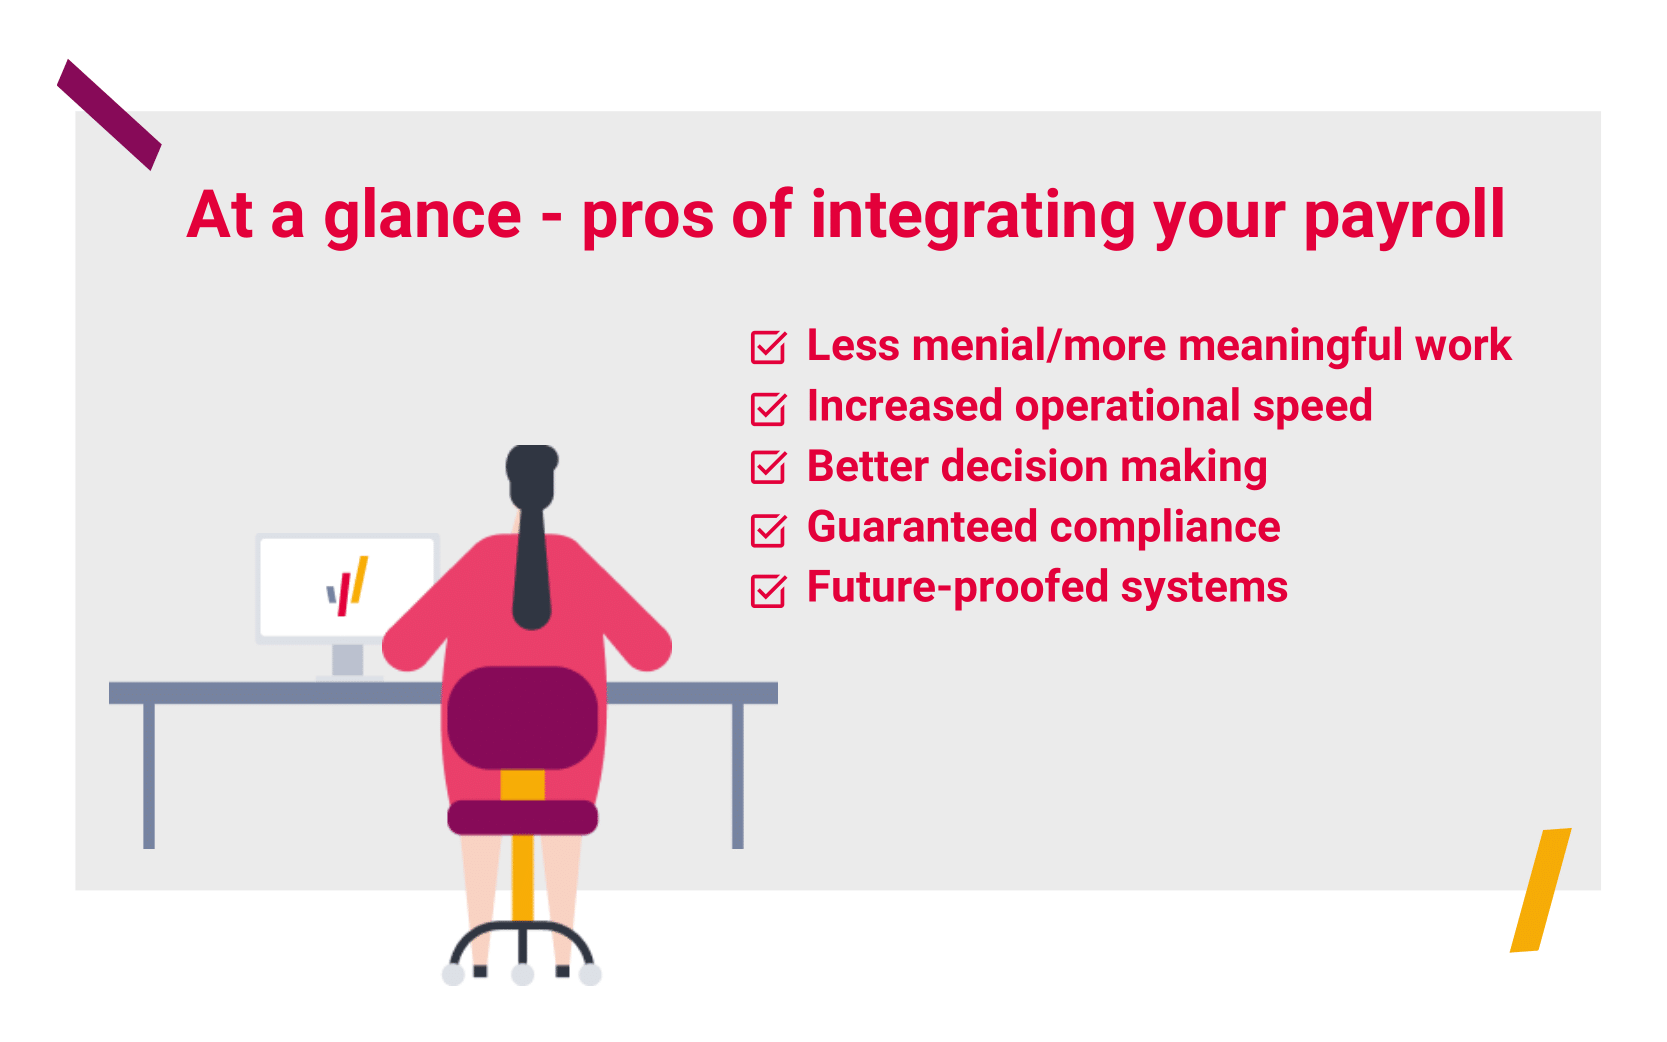 the pros of integrating payroll